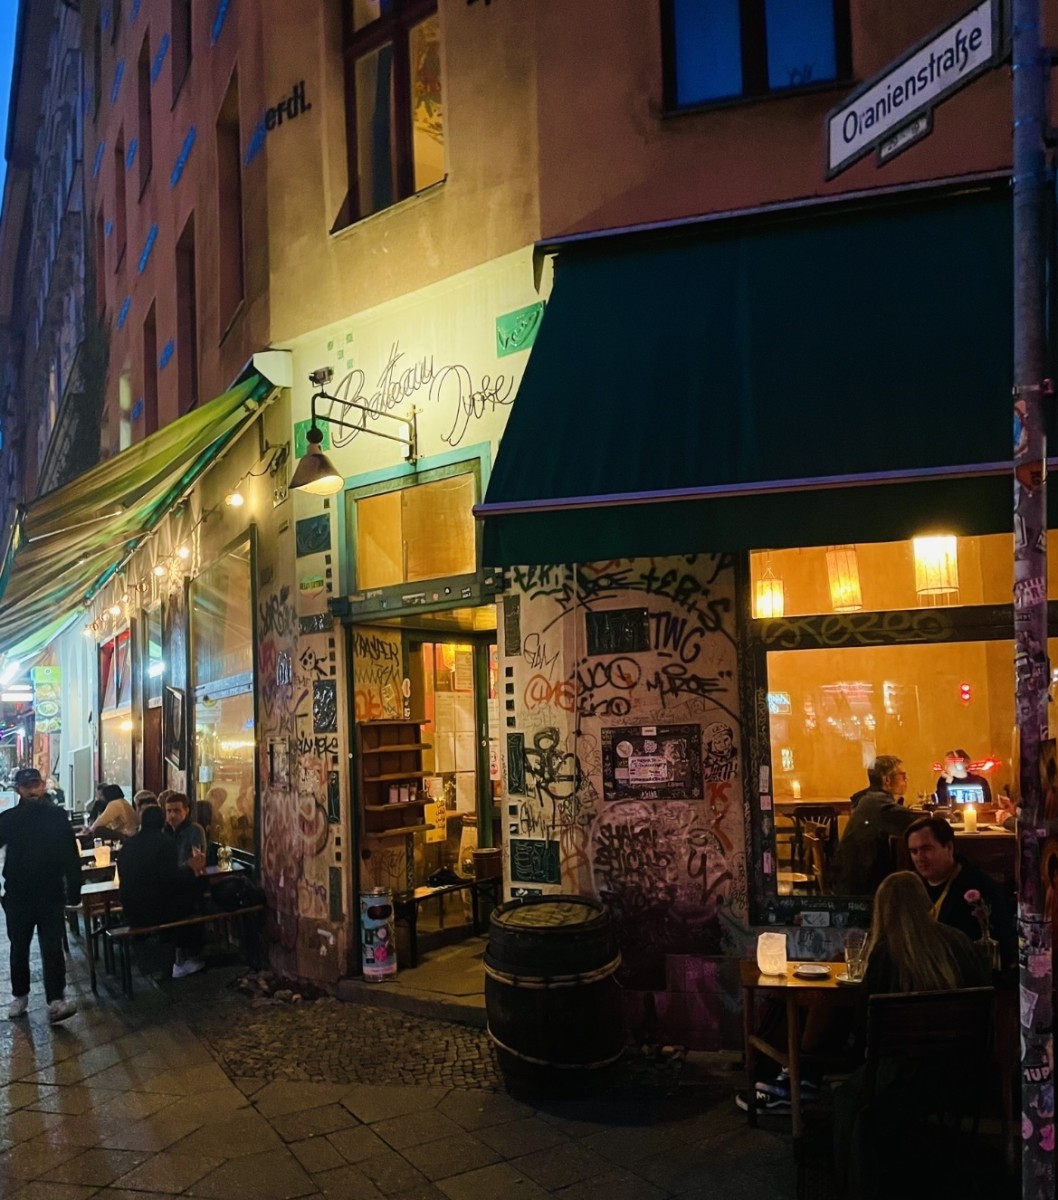 The multicultural Kreuzberg buzzes with life throughout the evening and night. Here from a cafe at Heinrichplatz. Layer upon layer of graffiti also characterizes the street scene here.